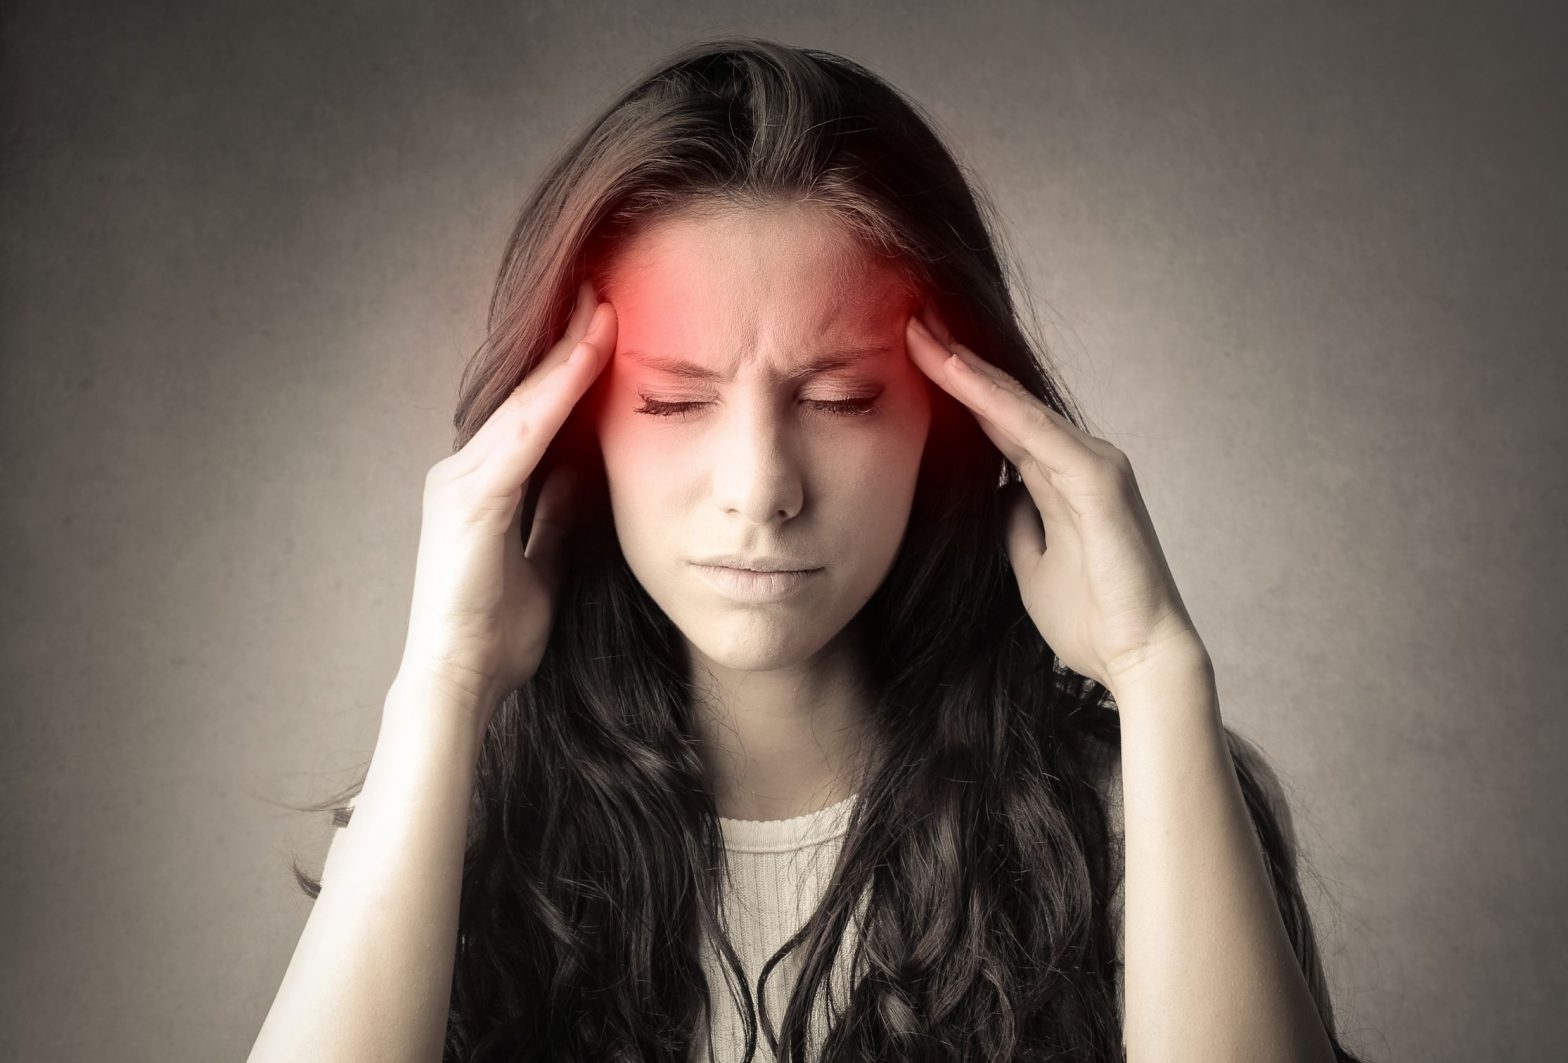 Woman experiencing intense pain and a severe headache.